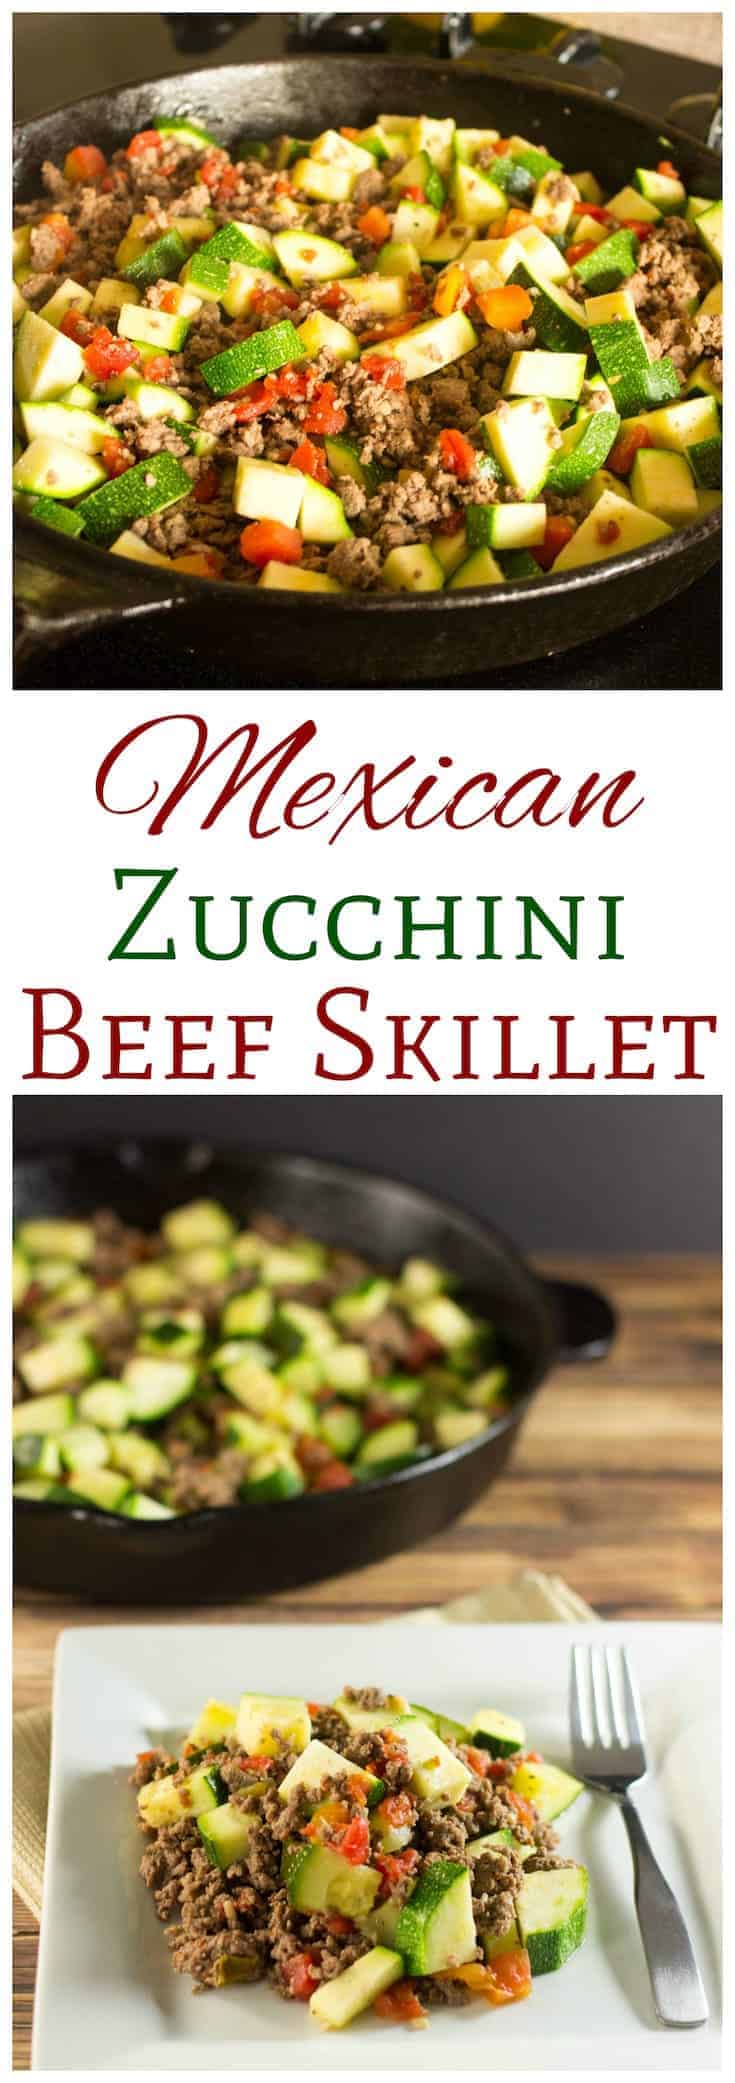 Mexican Zucchini and Ground Beef Skillet - Low Carb Yum